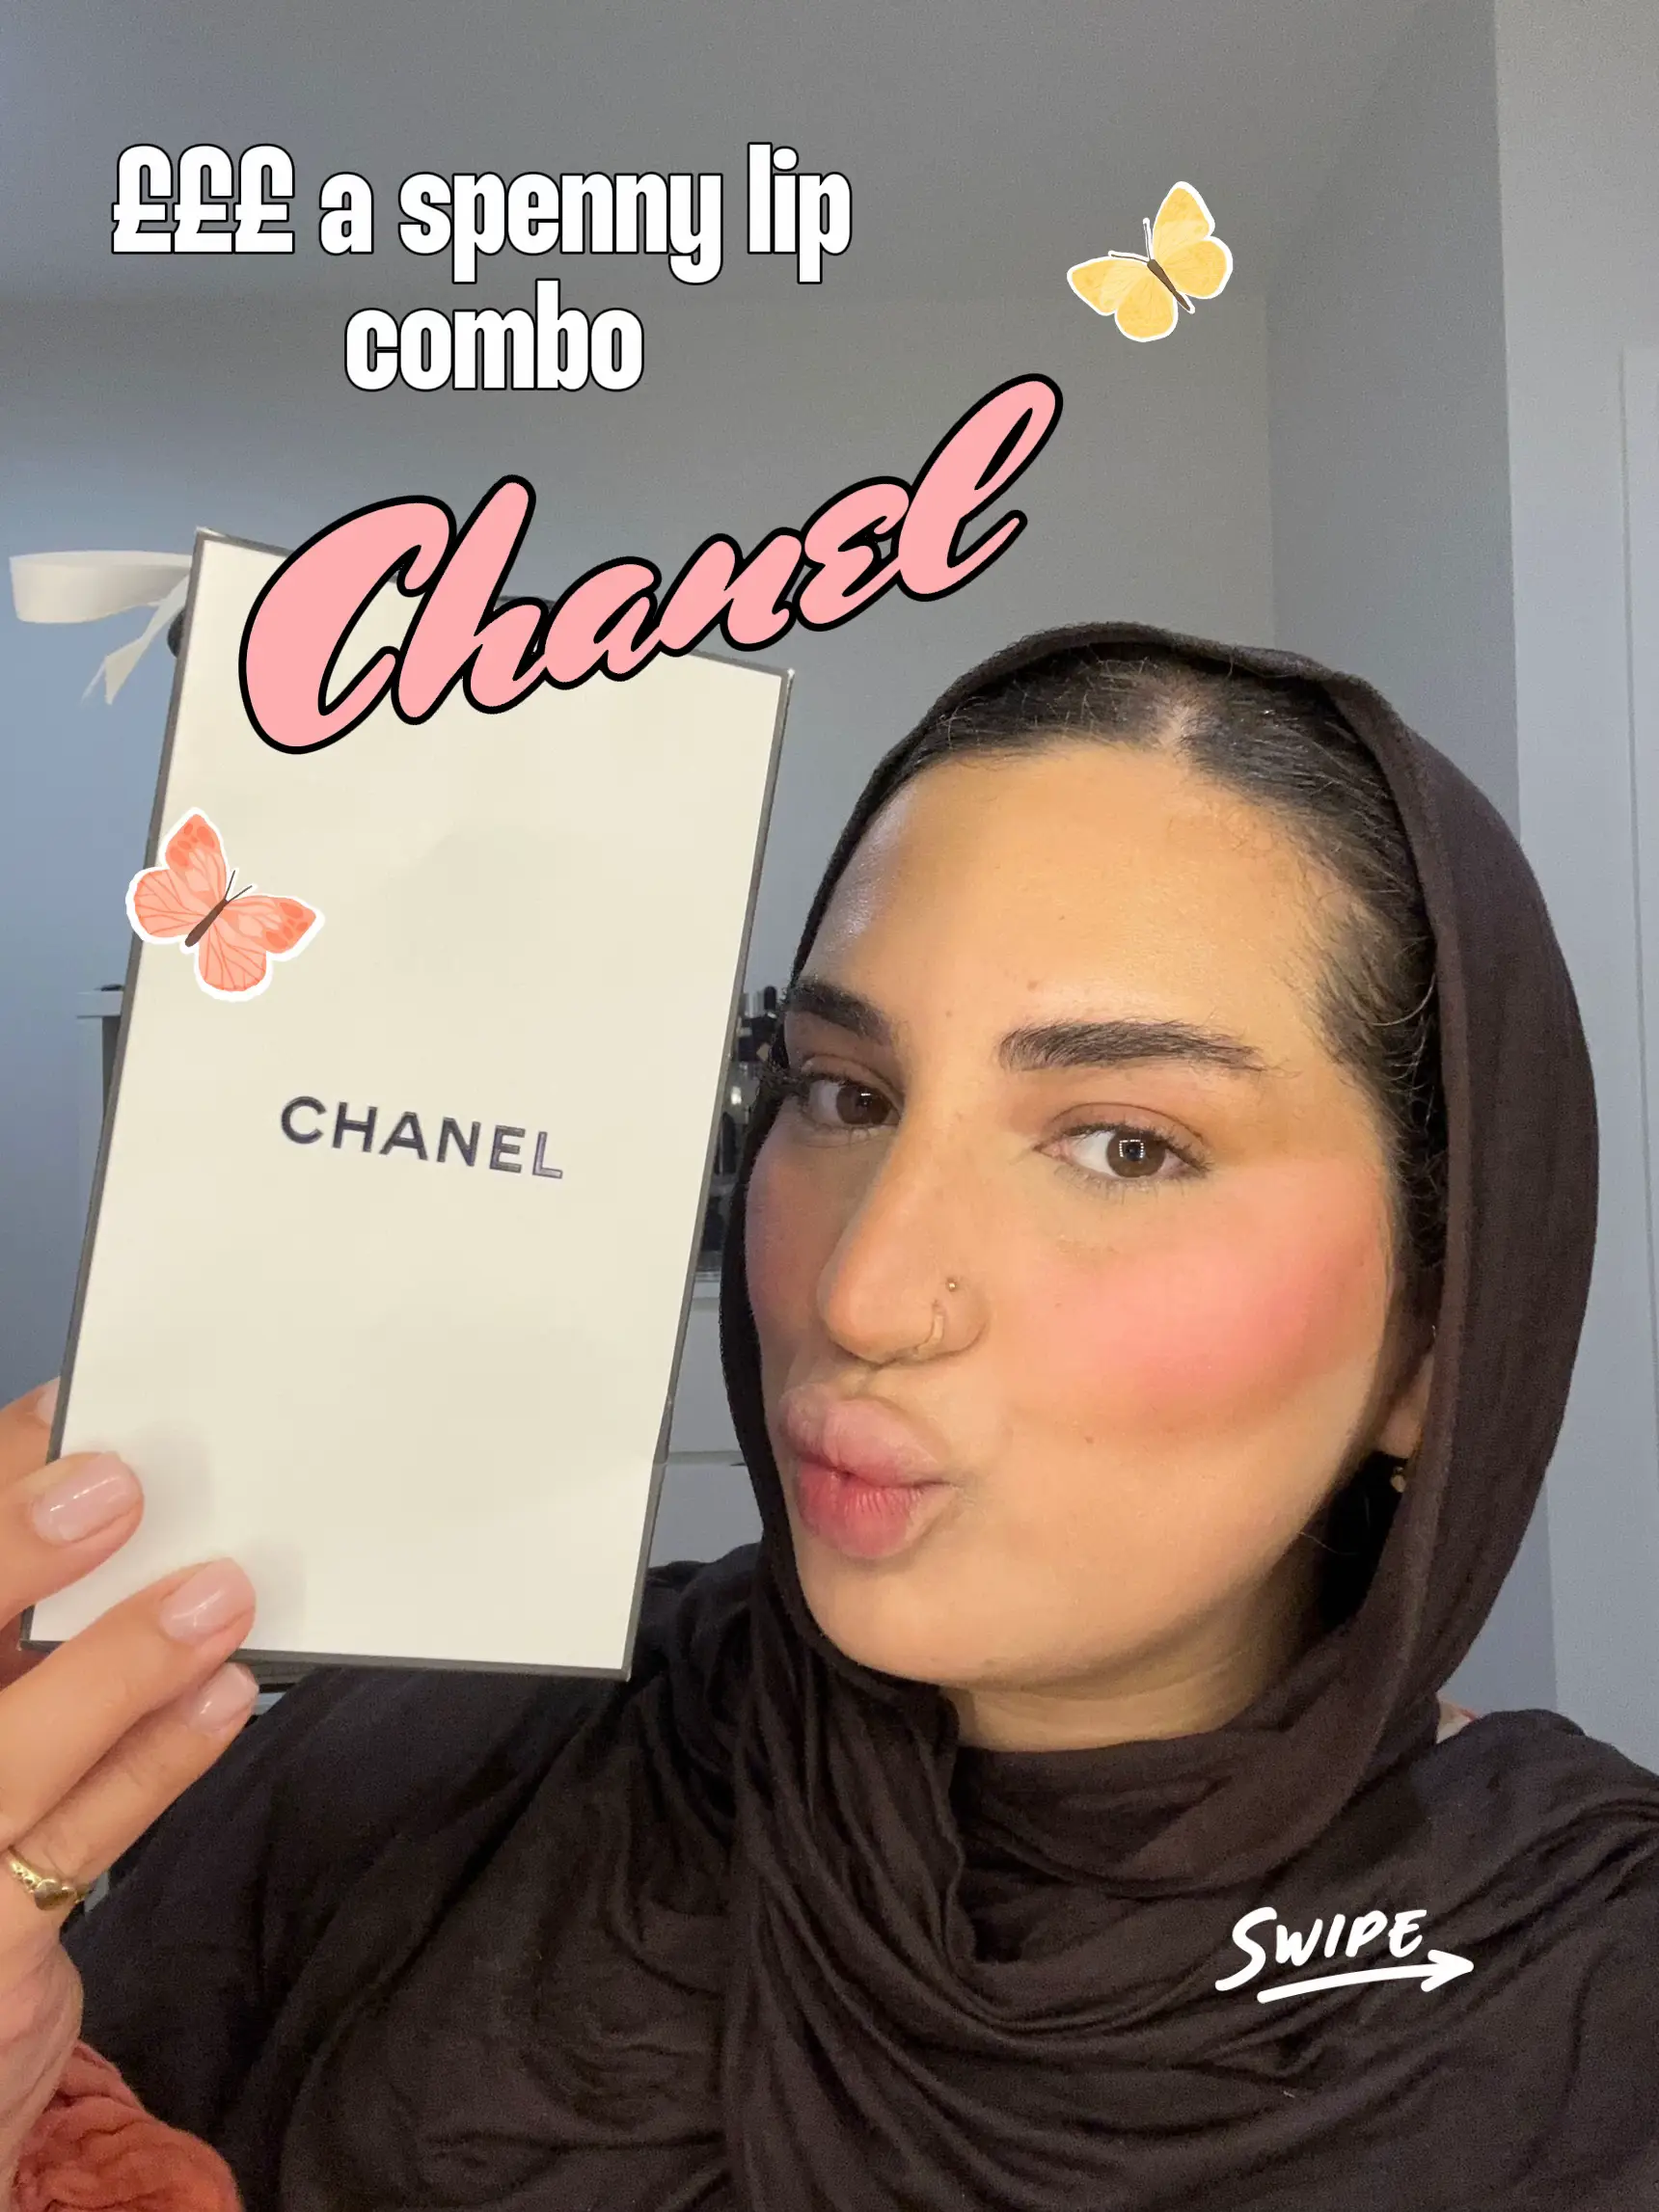 Chanel Lip combo 🌸, Gallery posted by Fatimaxbeauty